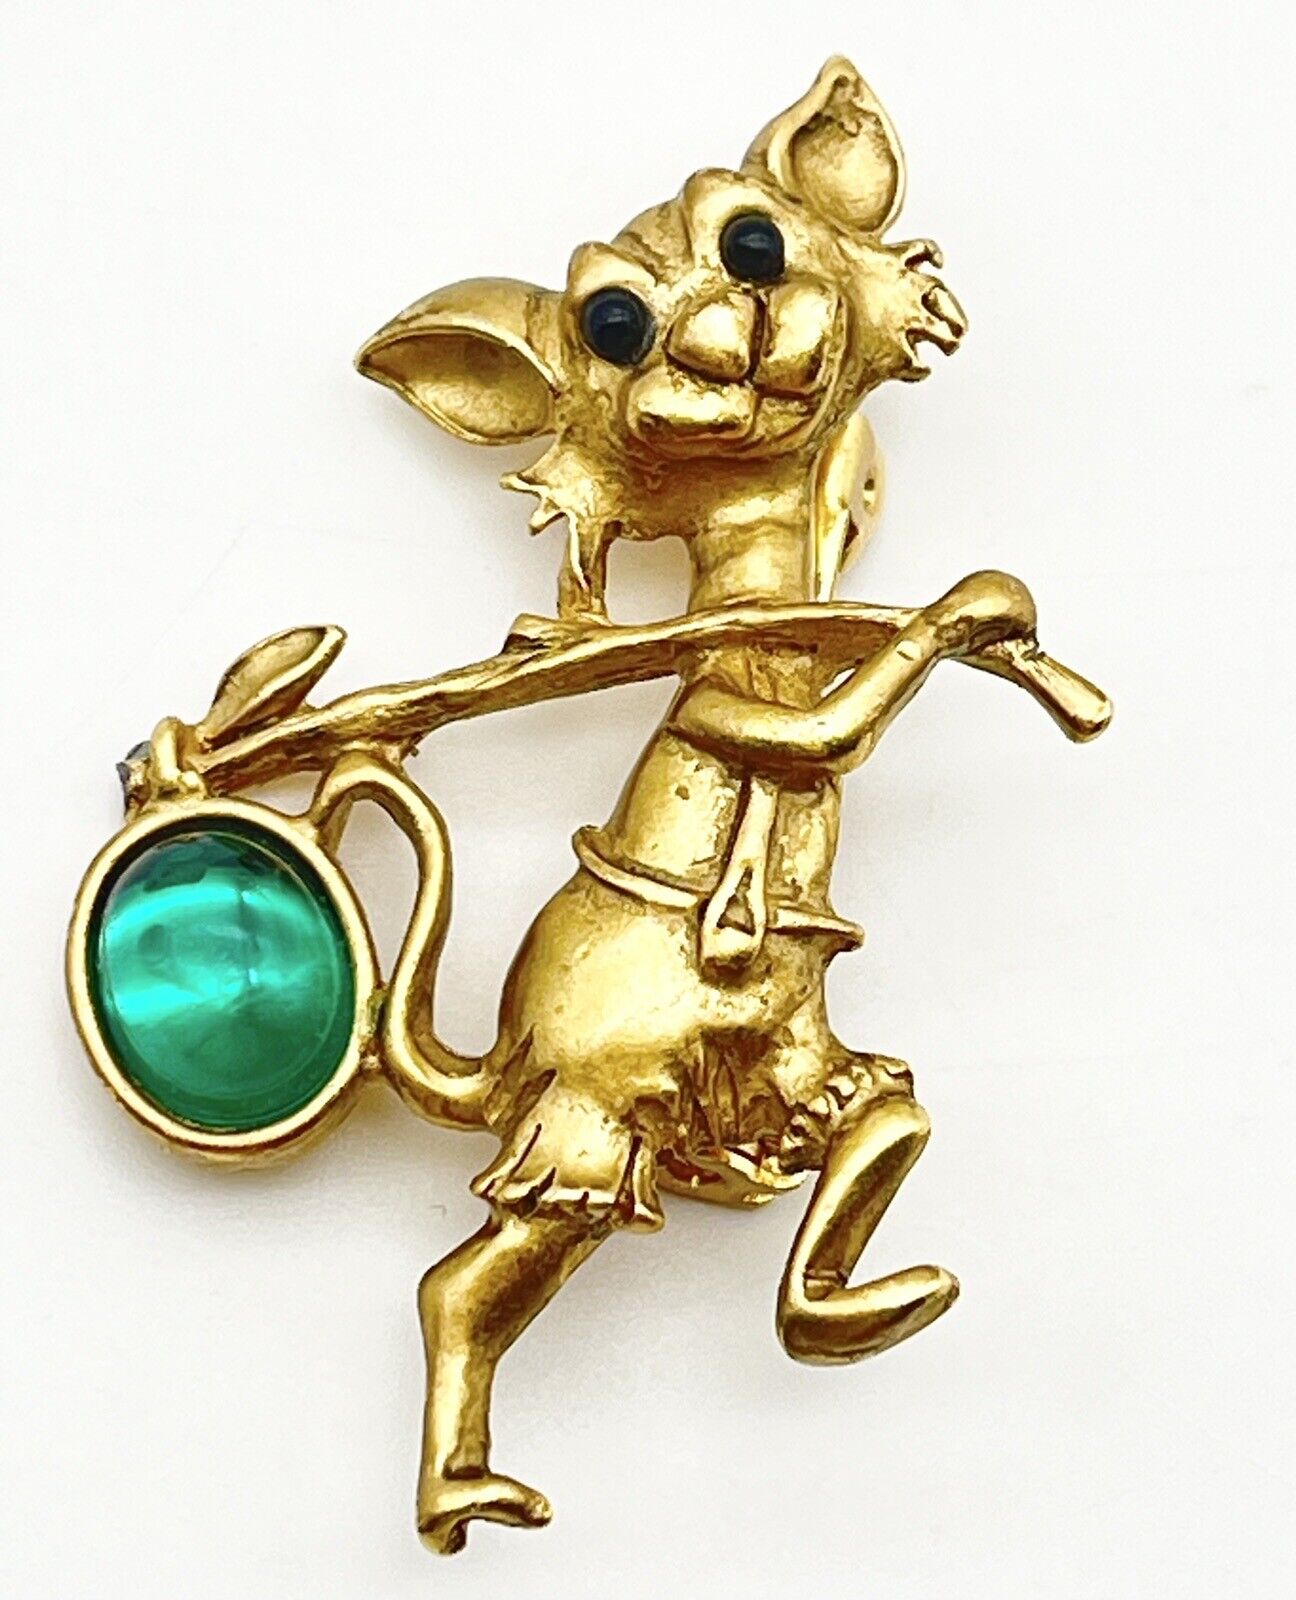 VTG Brooch Pin Hobo Kitty Cat with Emerald Green Stone for Pack Gold Tone Metal